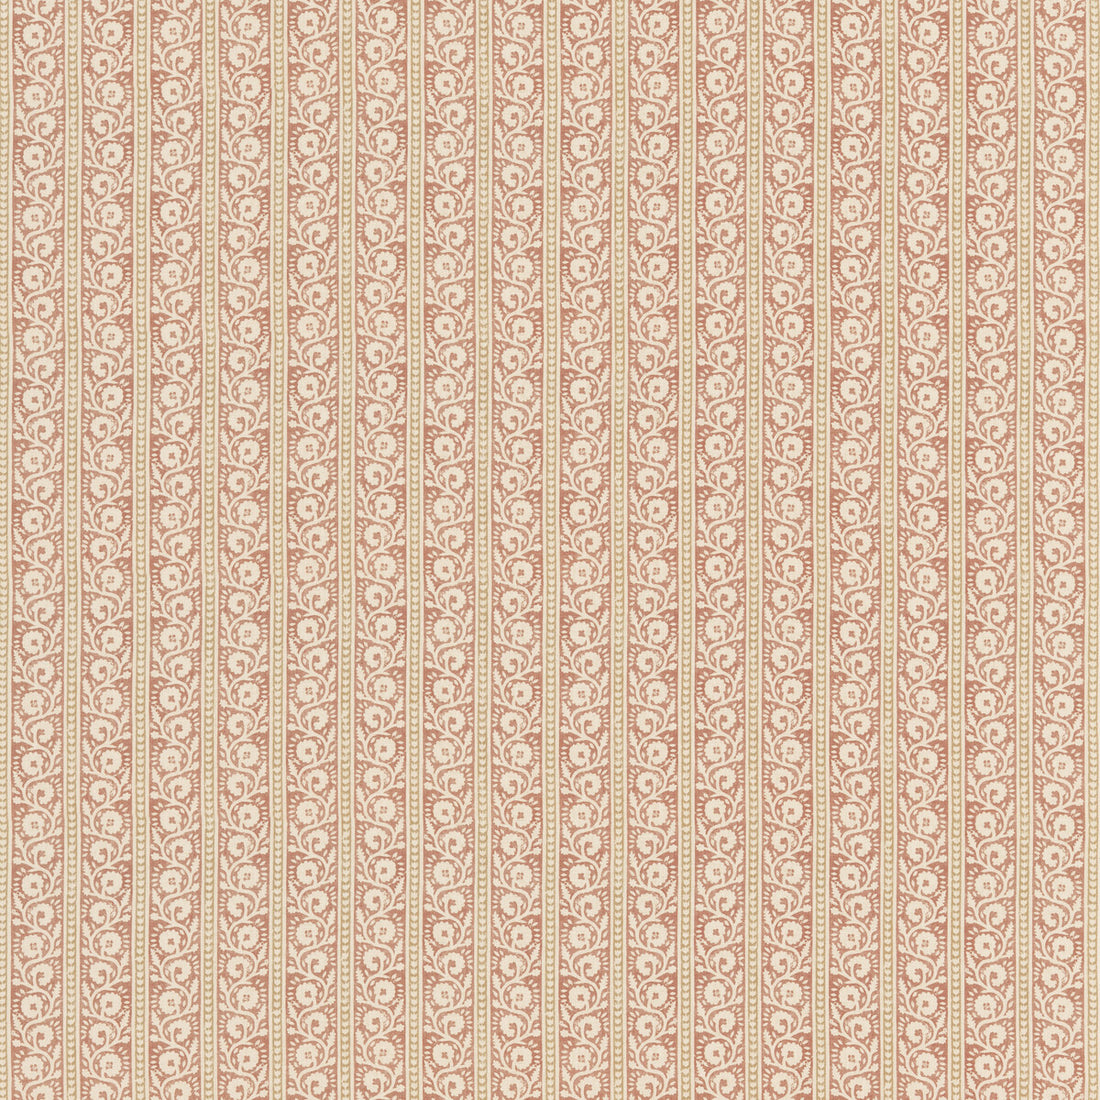 Bibury fabric in red/sand color - pattern BP10999.3.0 - by G P &amp; J Baker in the House Small Prints collection